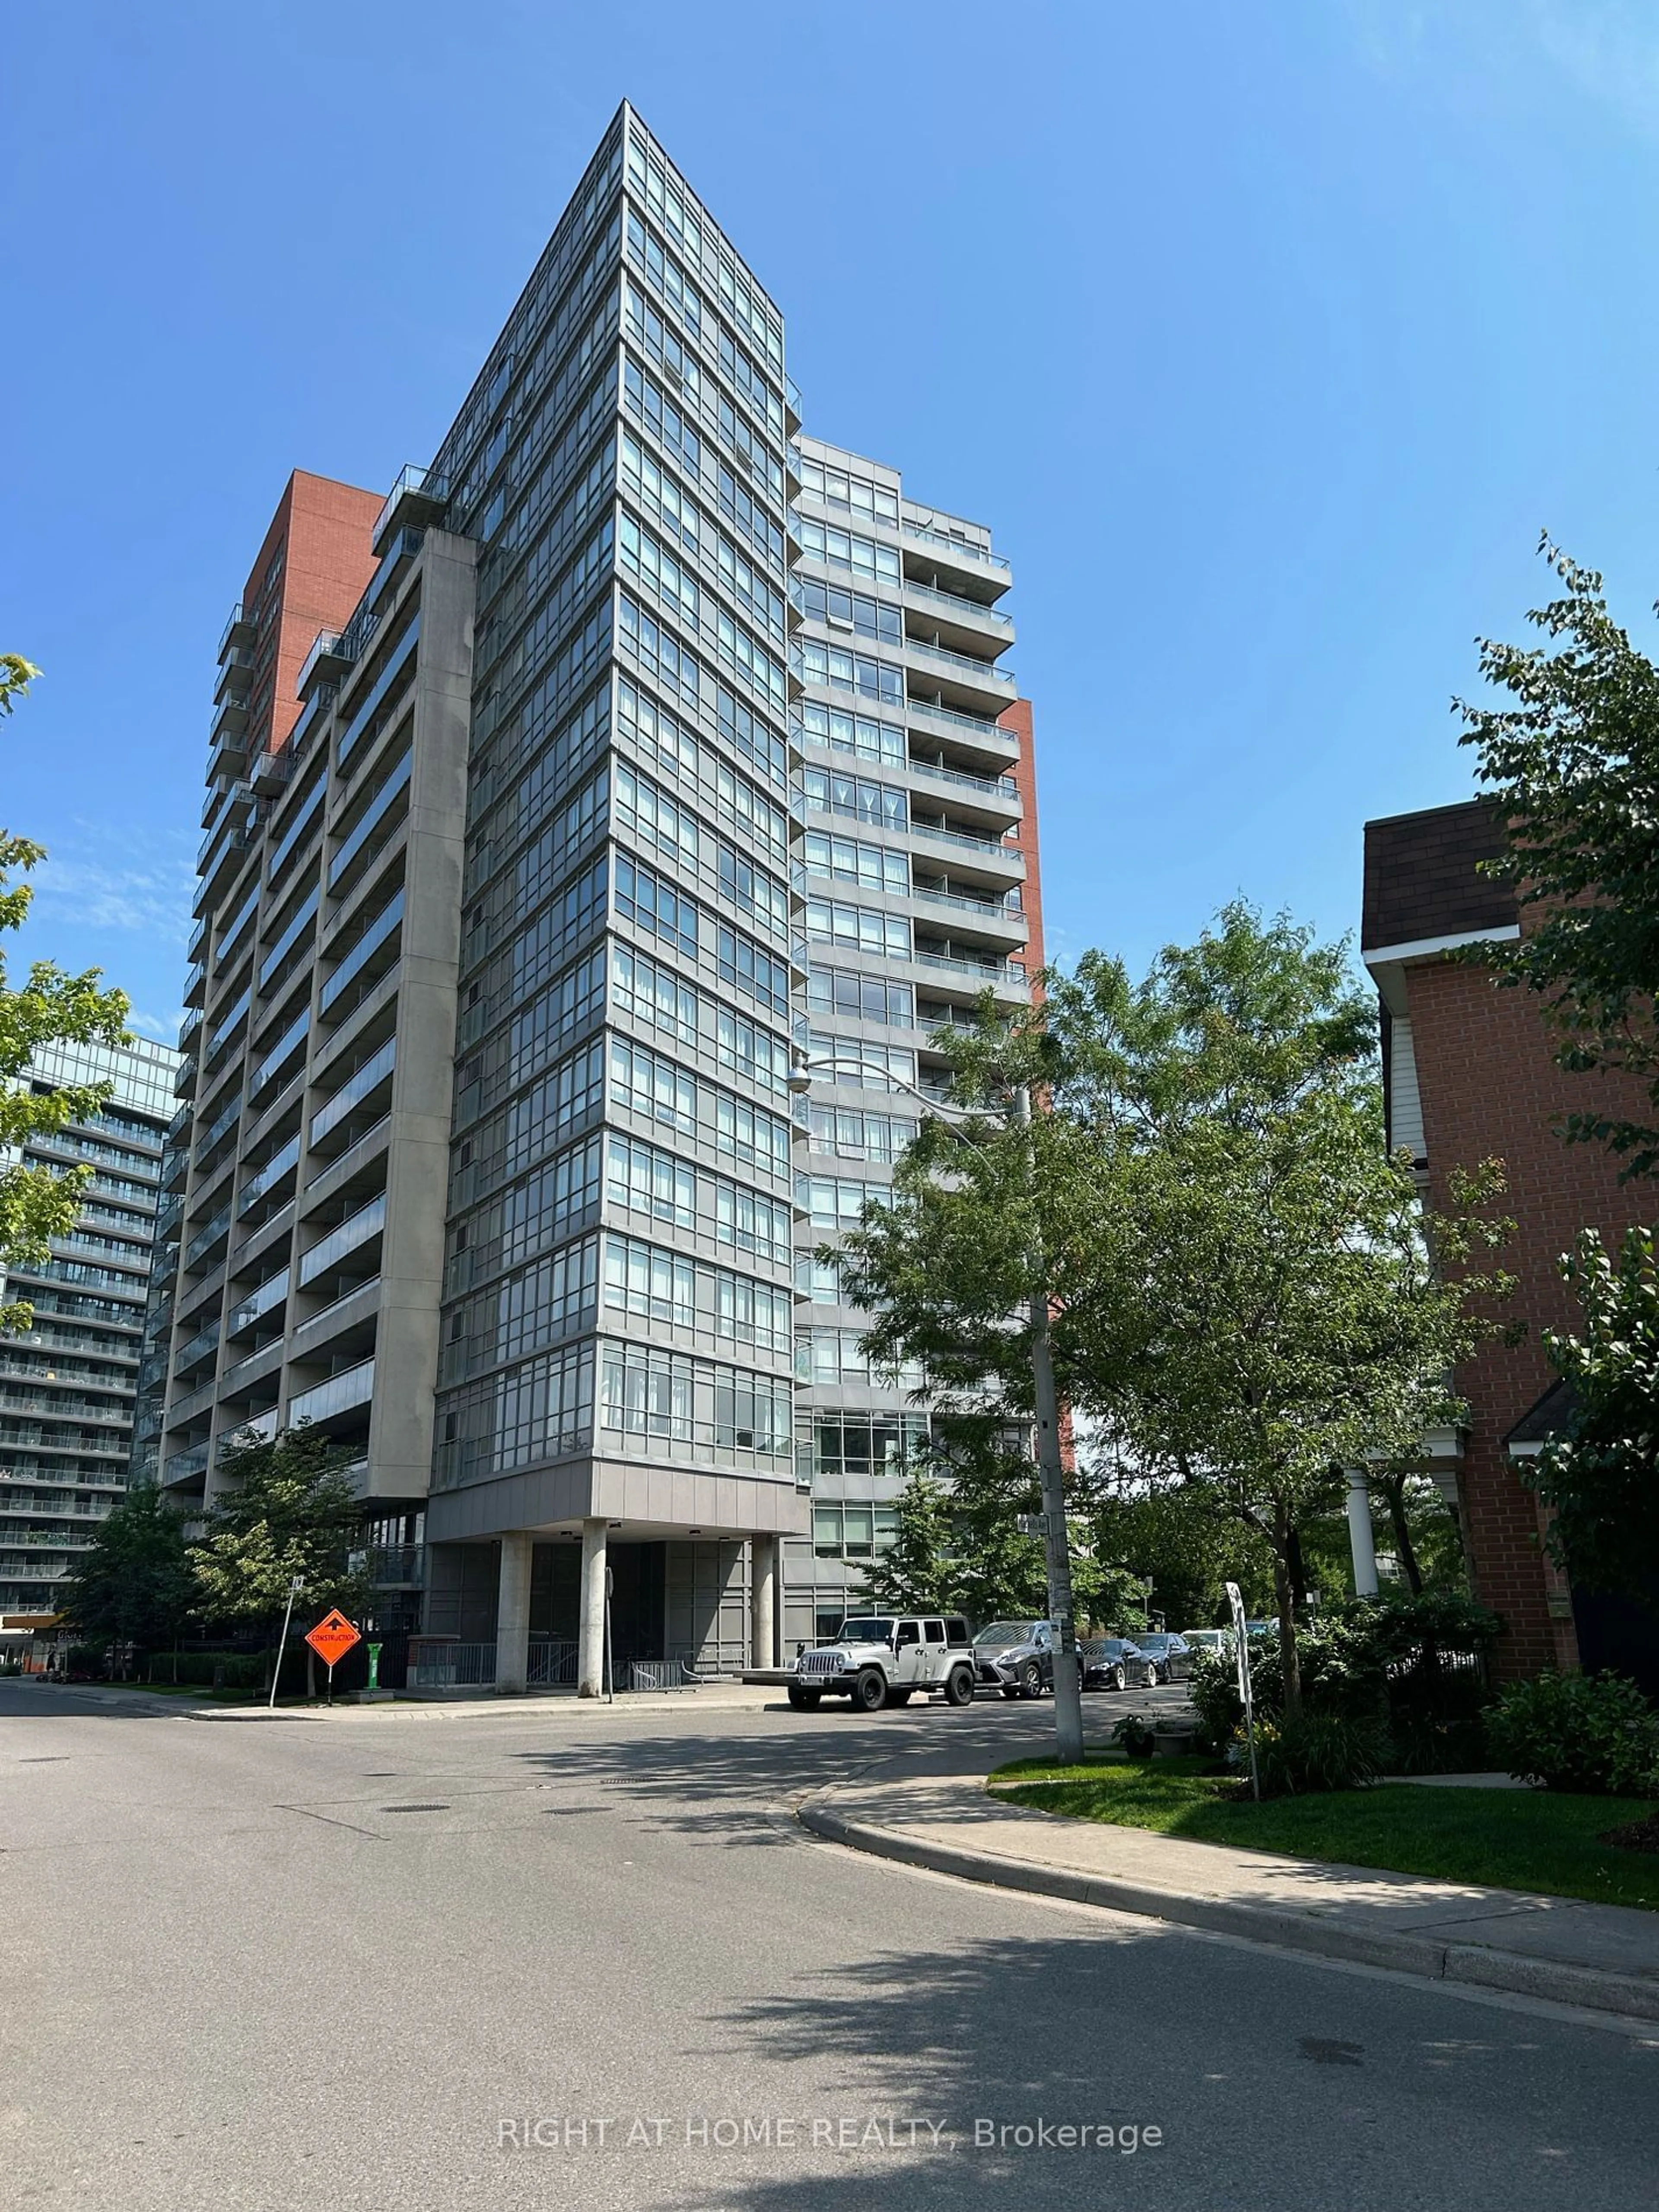 A pic from exterior of the house or condo for 38 Joe Shuster Way #318, Toronto Ontario M6K 0A5